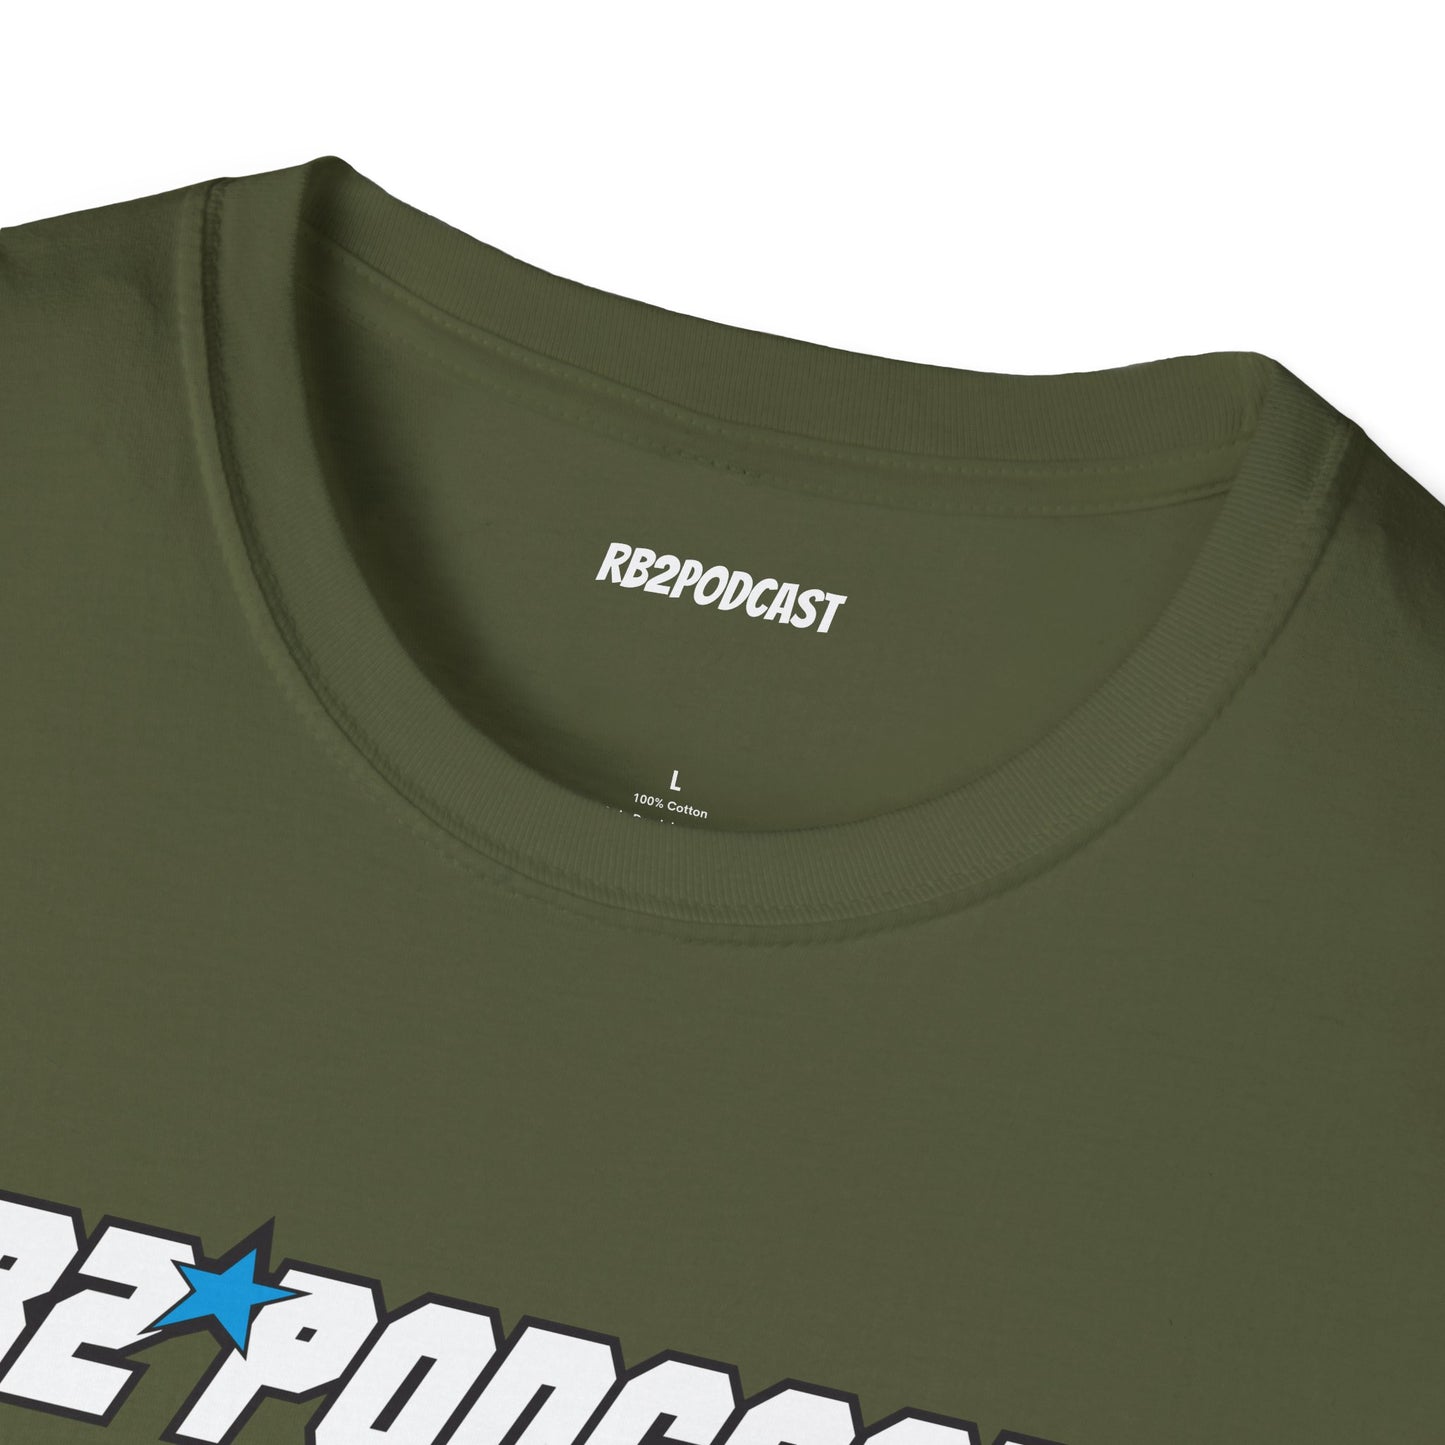 RB2podcast Army T-Shirt